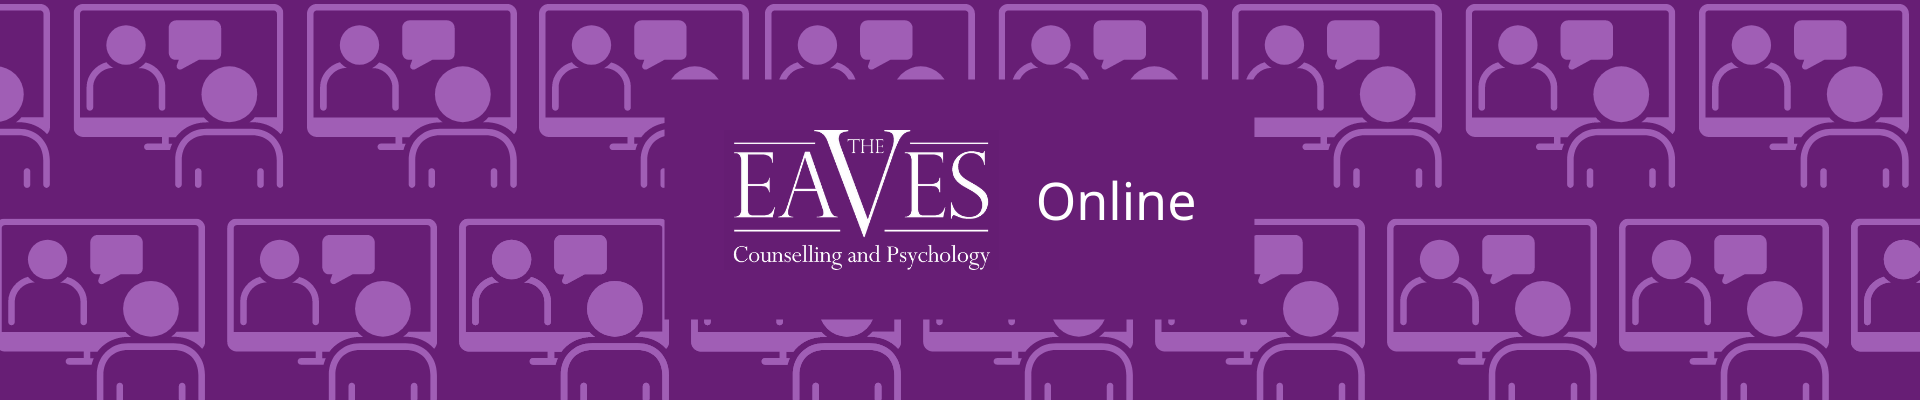 The Eaves Online background image